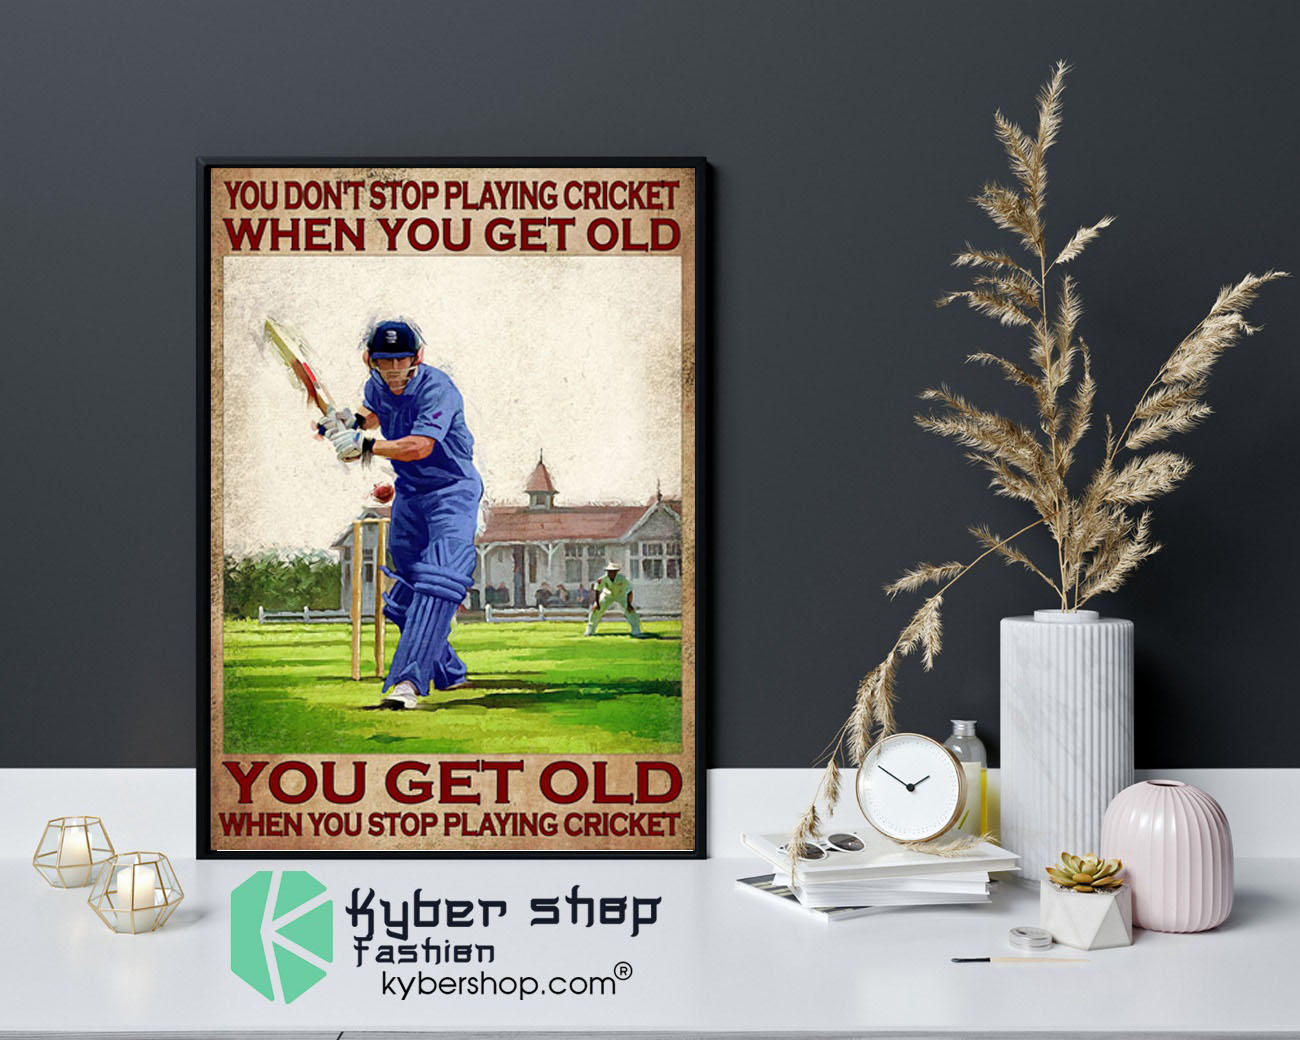 You don't stop playing cricket when you get old poster9